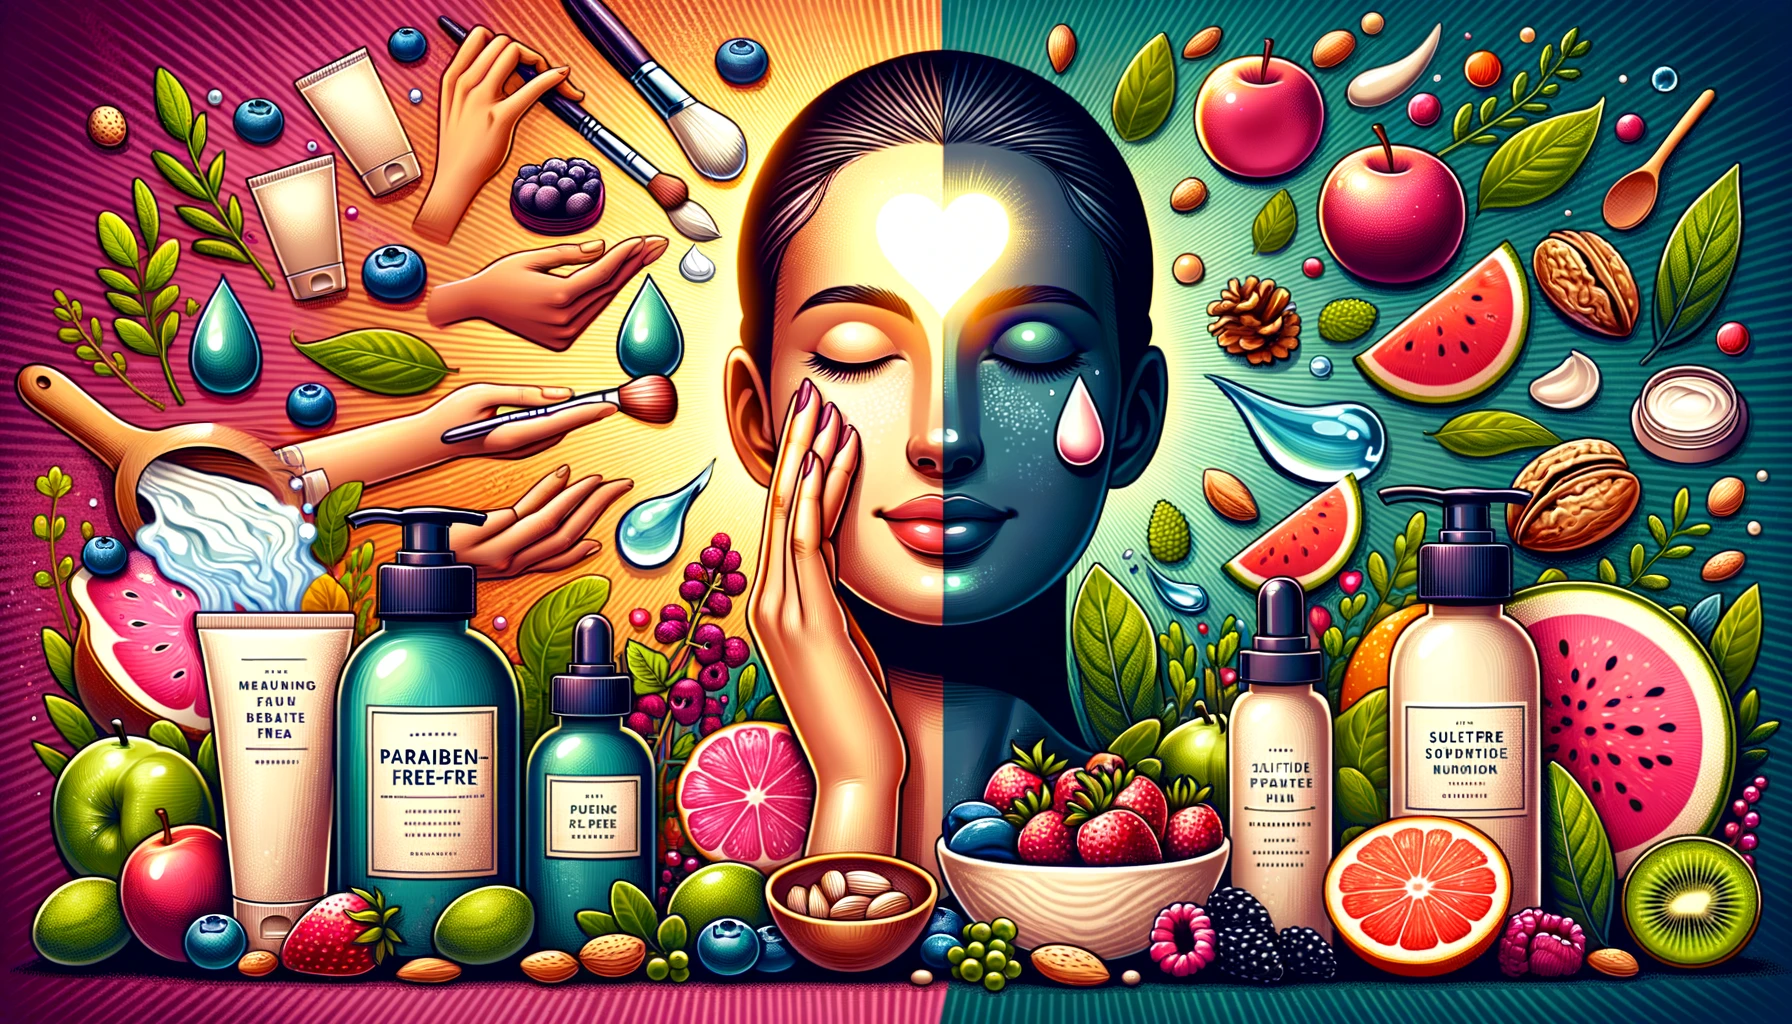 Illustration showcasing diverse individuals using natural skincare products and nutritious foods promoting hydration and natural beauty.